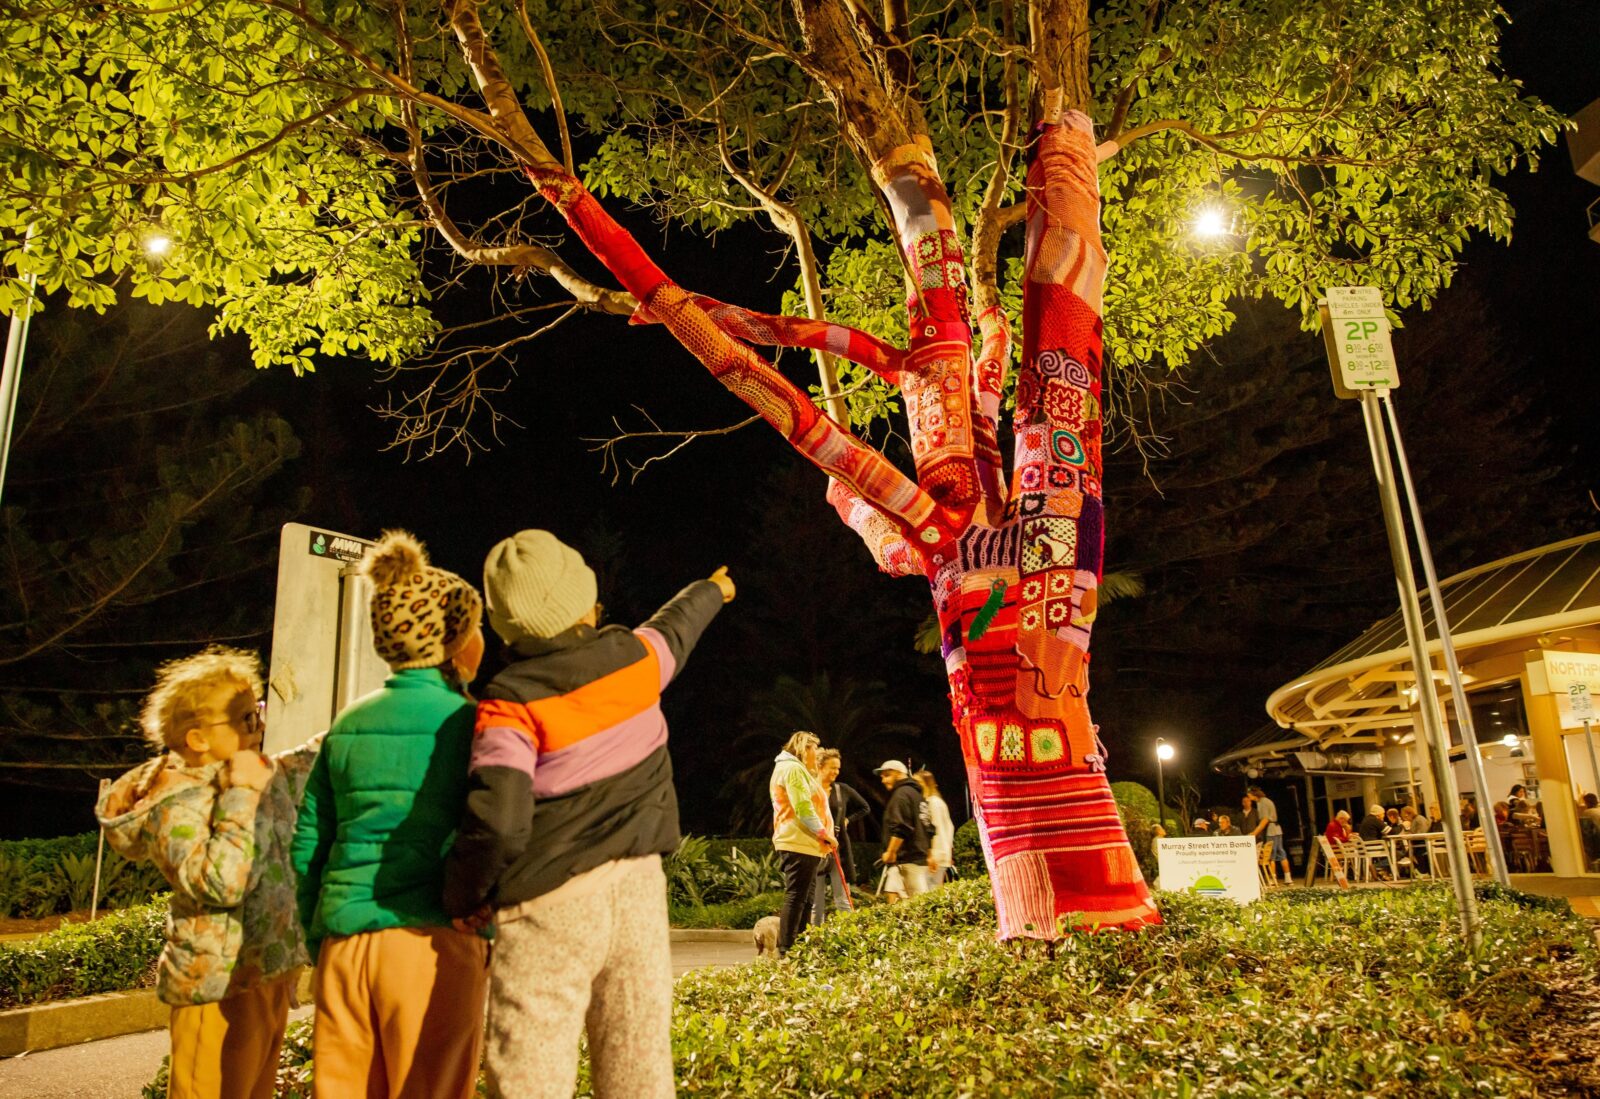 Children pointing a tree that has been yarn bombed